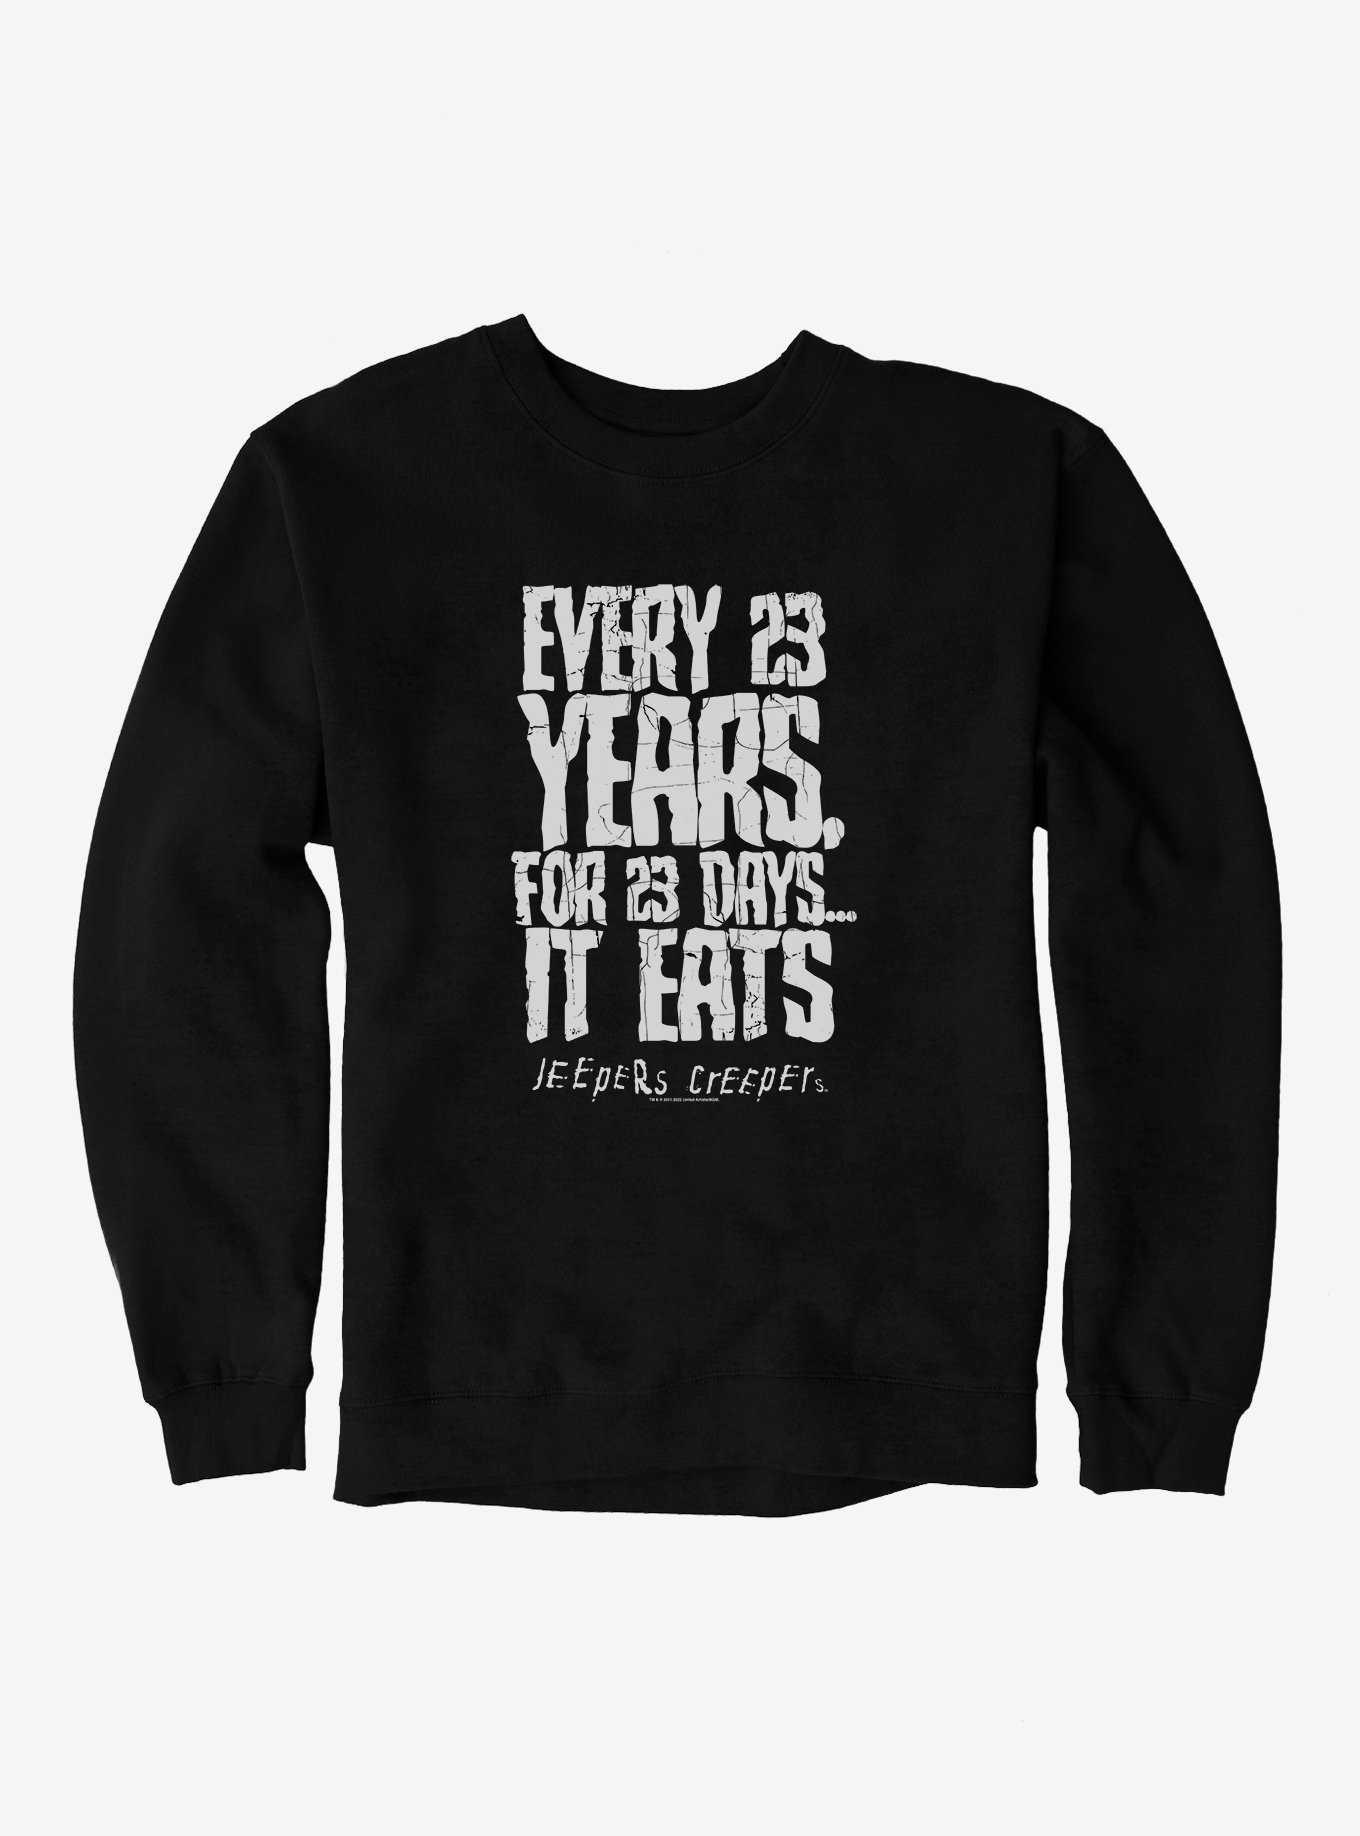 Jeepers Creepers 23 Years For 23 Days Sweatshirt, , hi-res